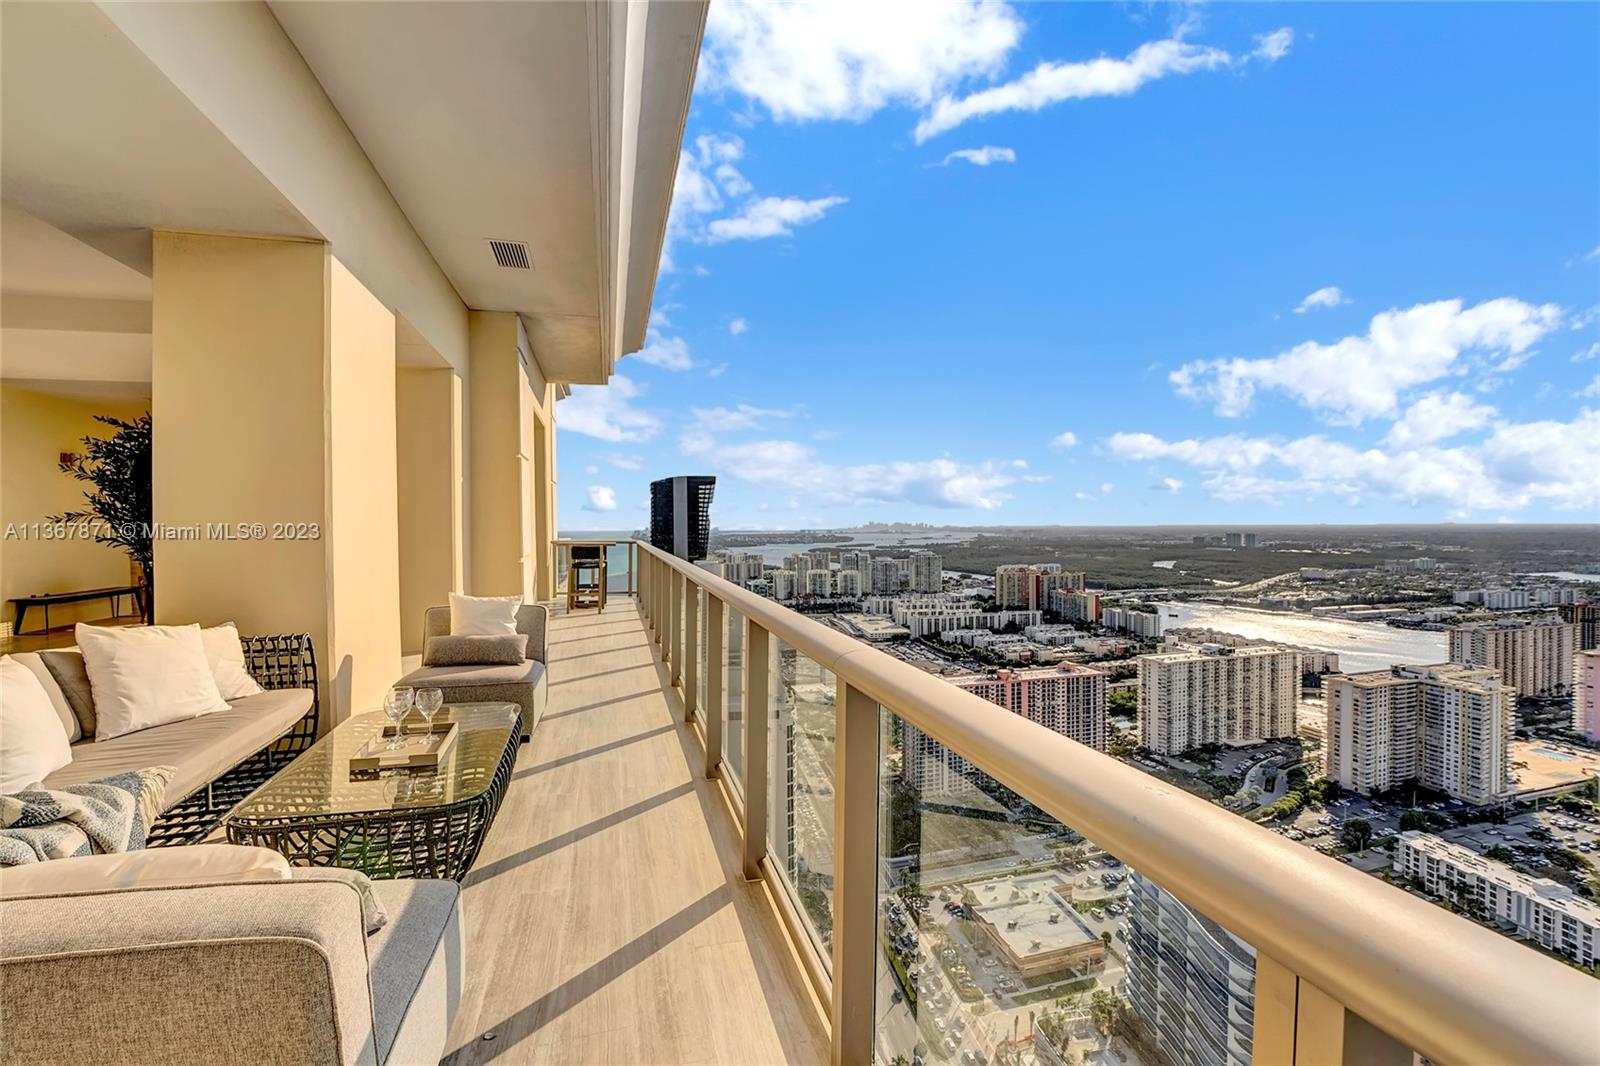 West Terrace with views of Downtown Miami and the intracoastal, including the Hard Rock Casino! Mind blowing.